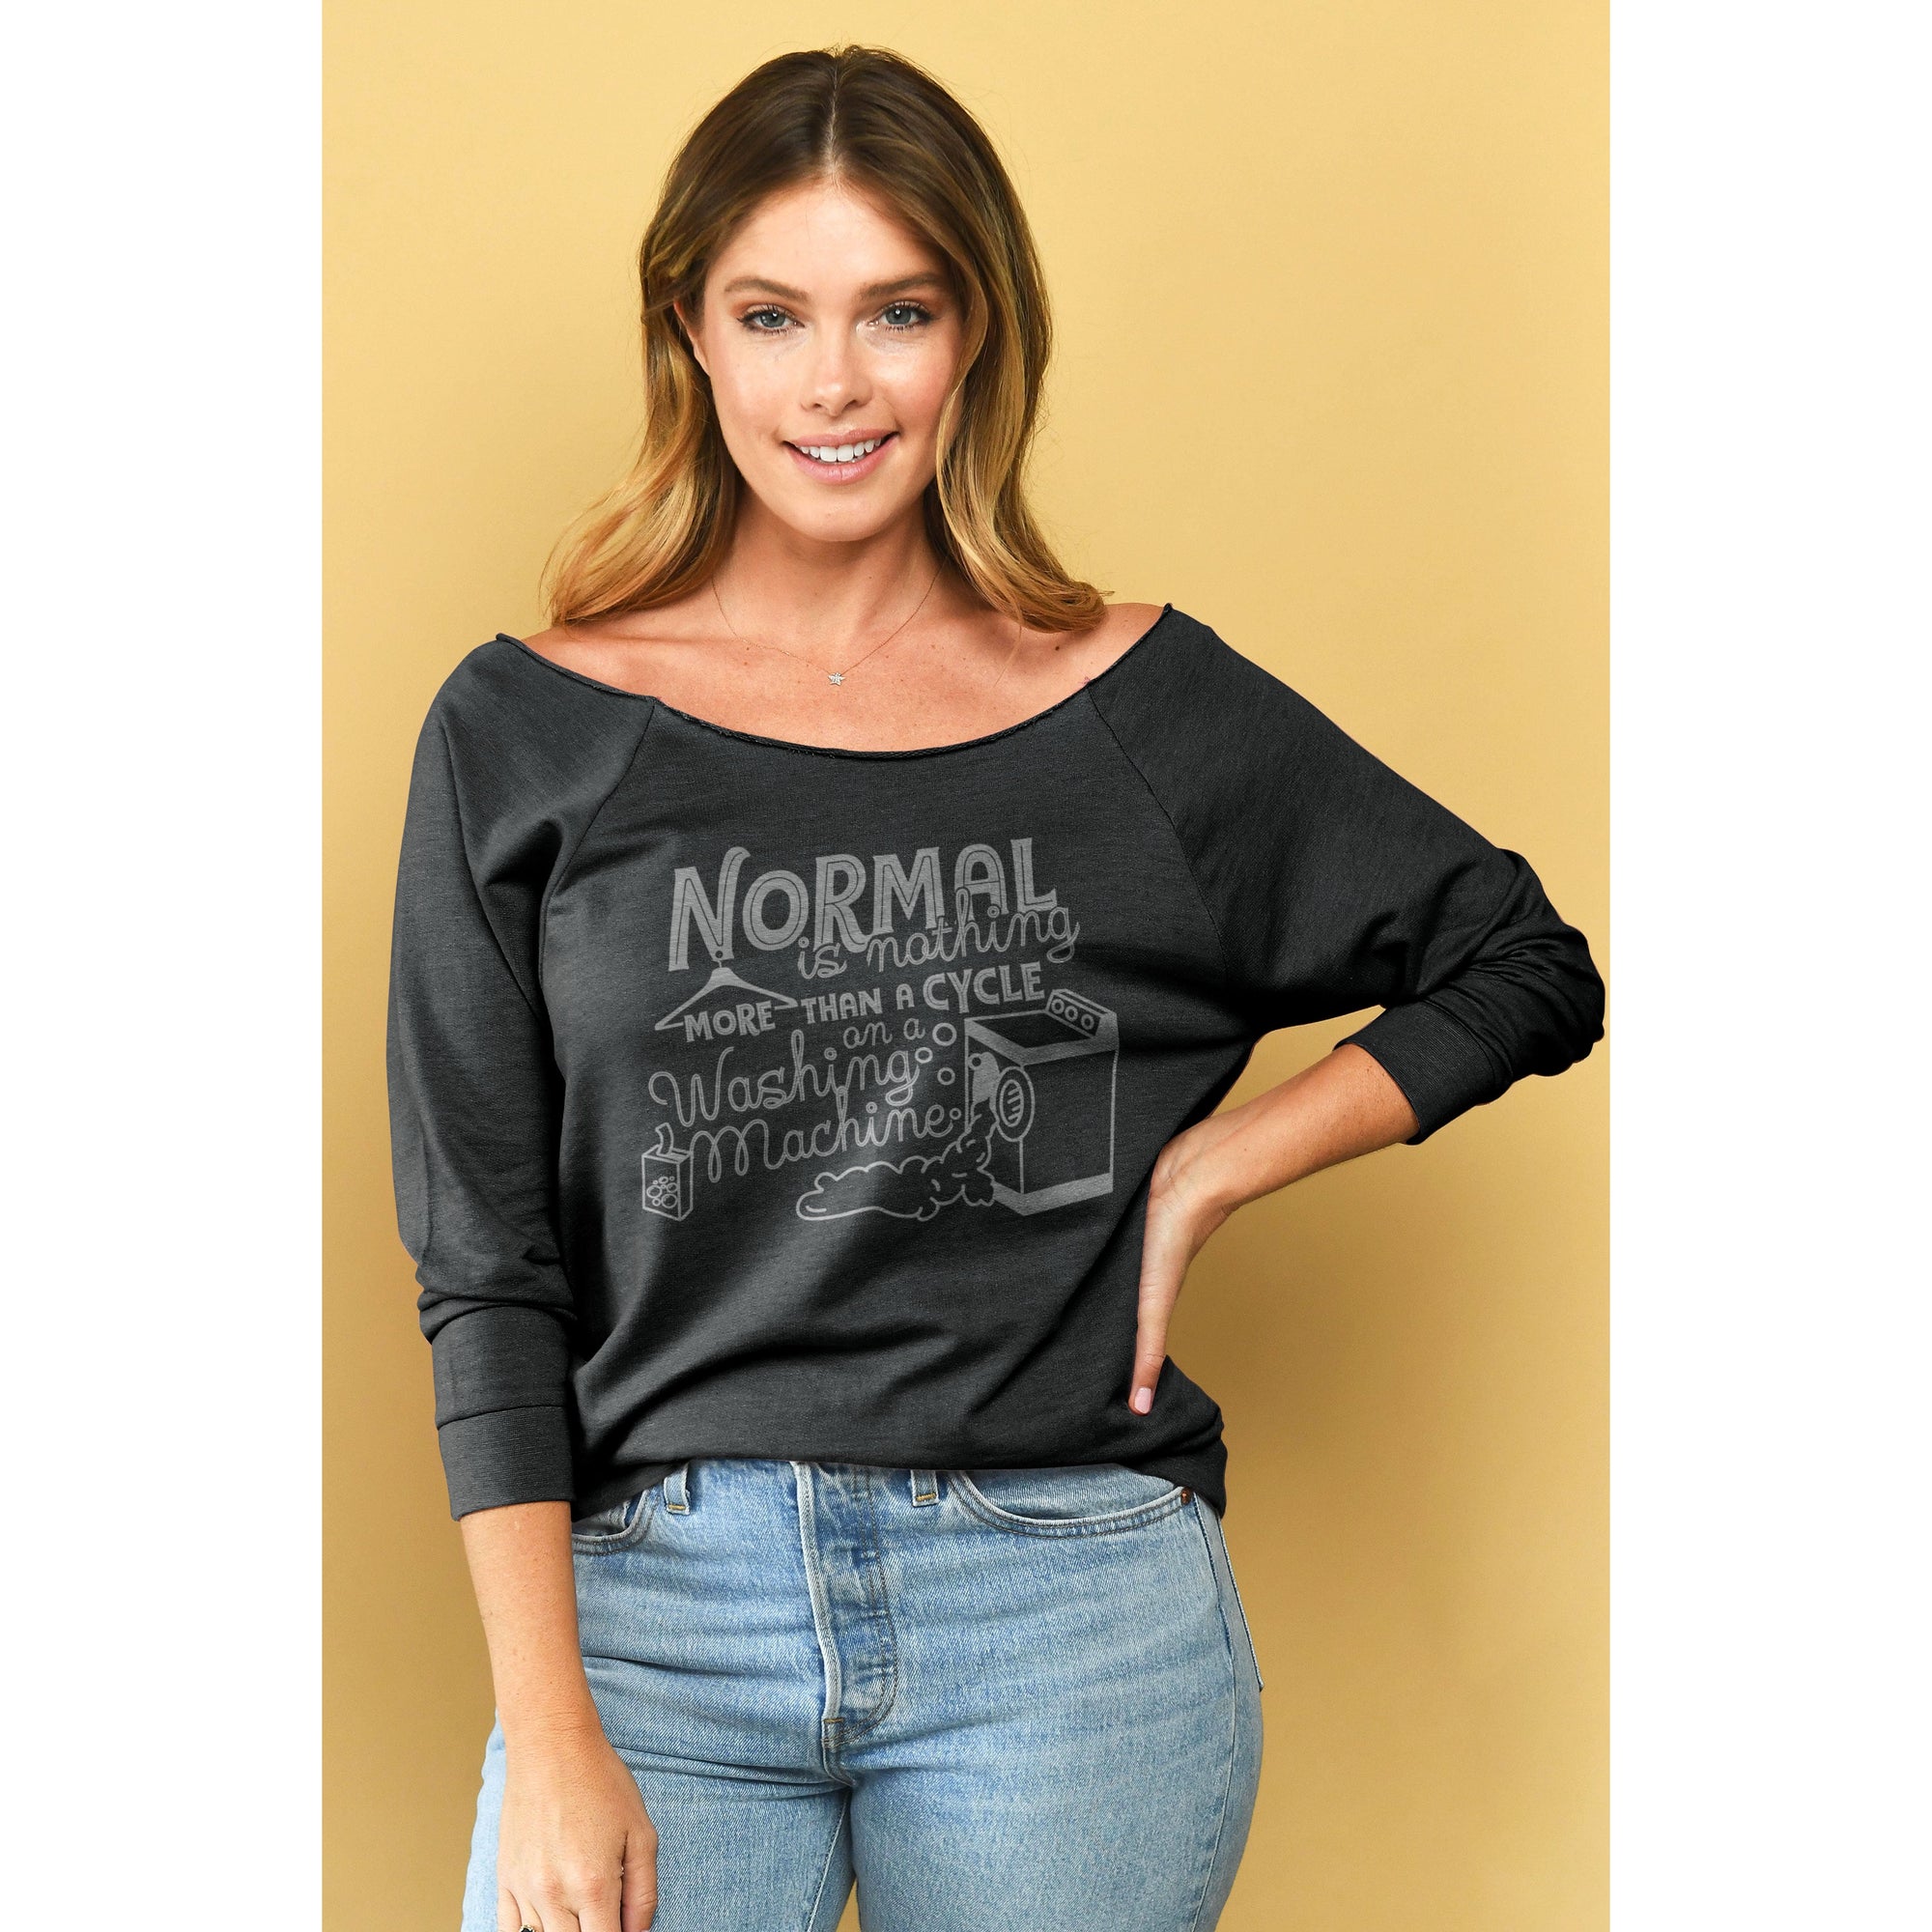 Normal is nothing more than a cycle on a washing machine - threadtank | stories you can wear